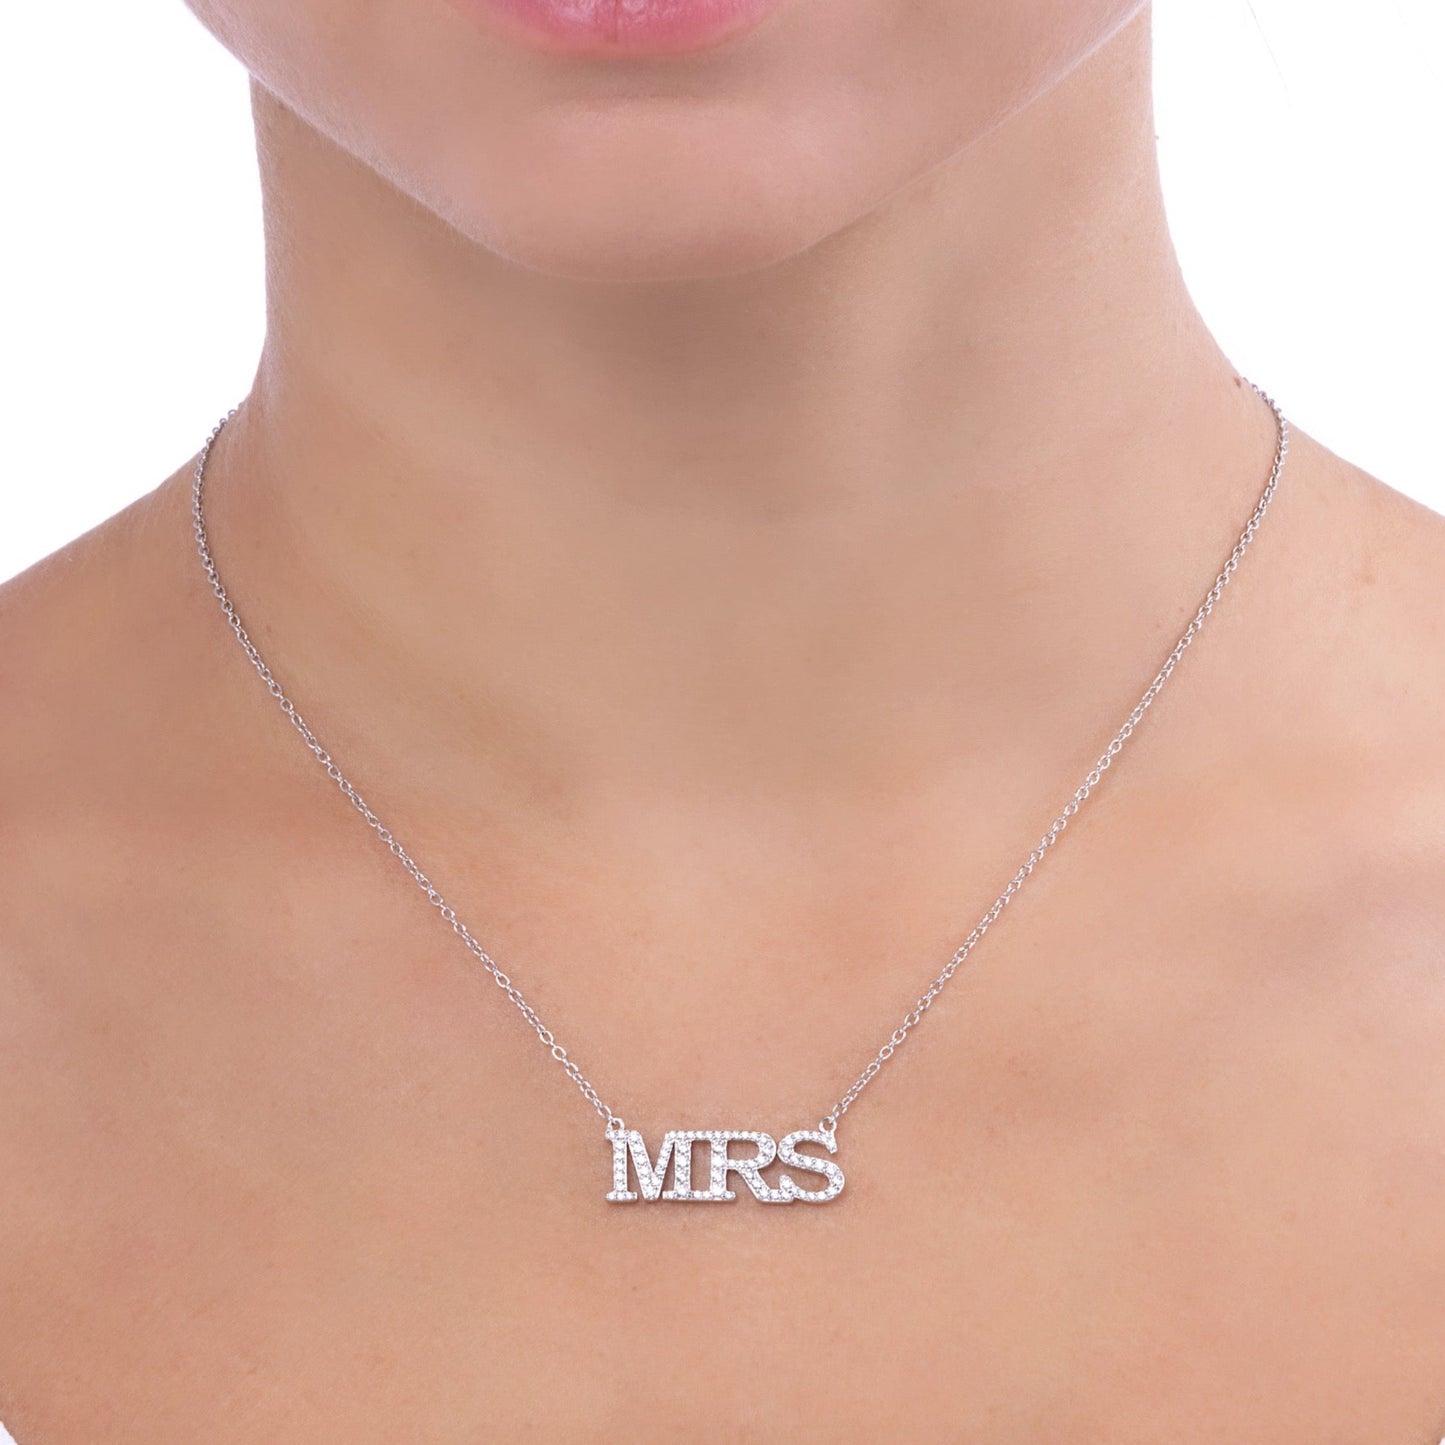 Kate 06 MRS Necklace